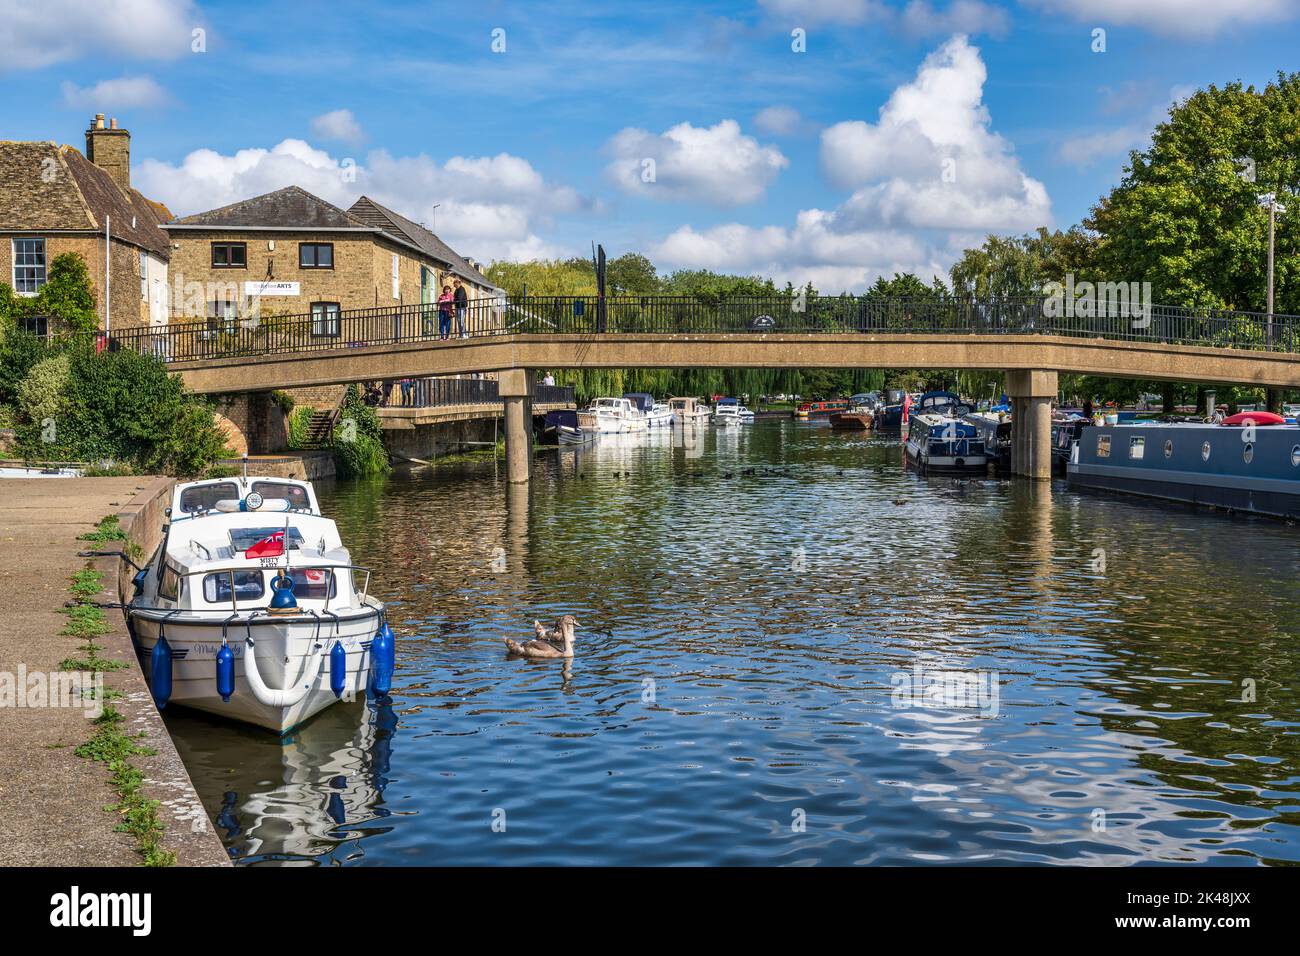 Boats moored on River Great Ouse with the Babylon Bridge in the background in Ely, Cambridgeshire, England, UK Stock Photo